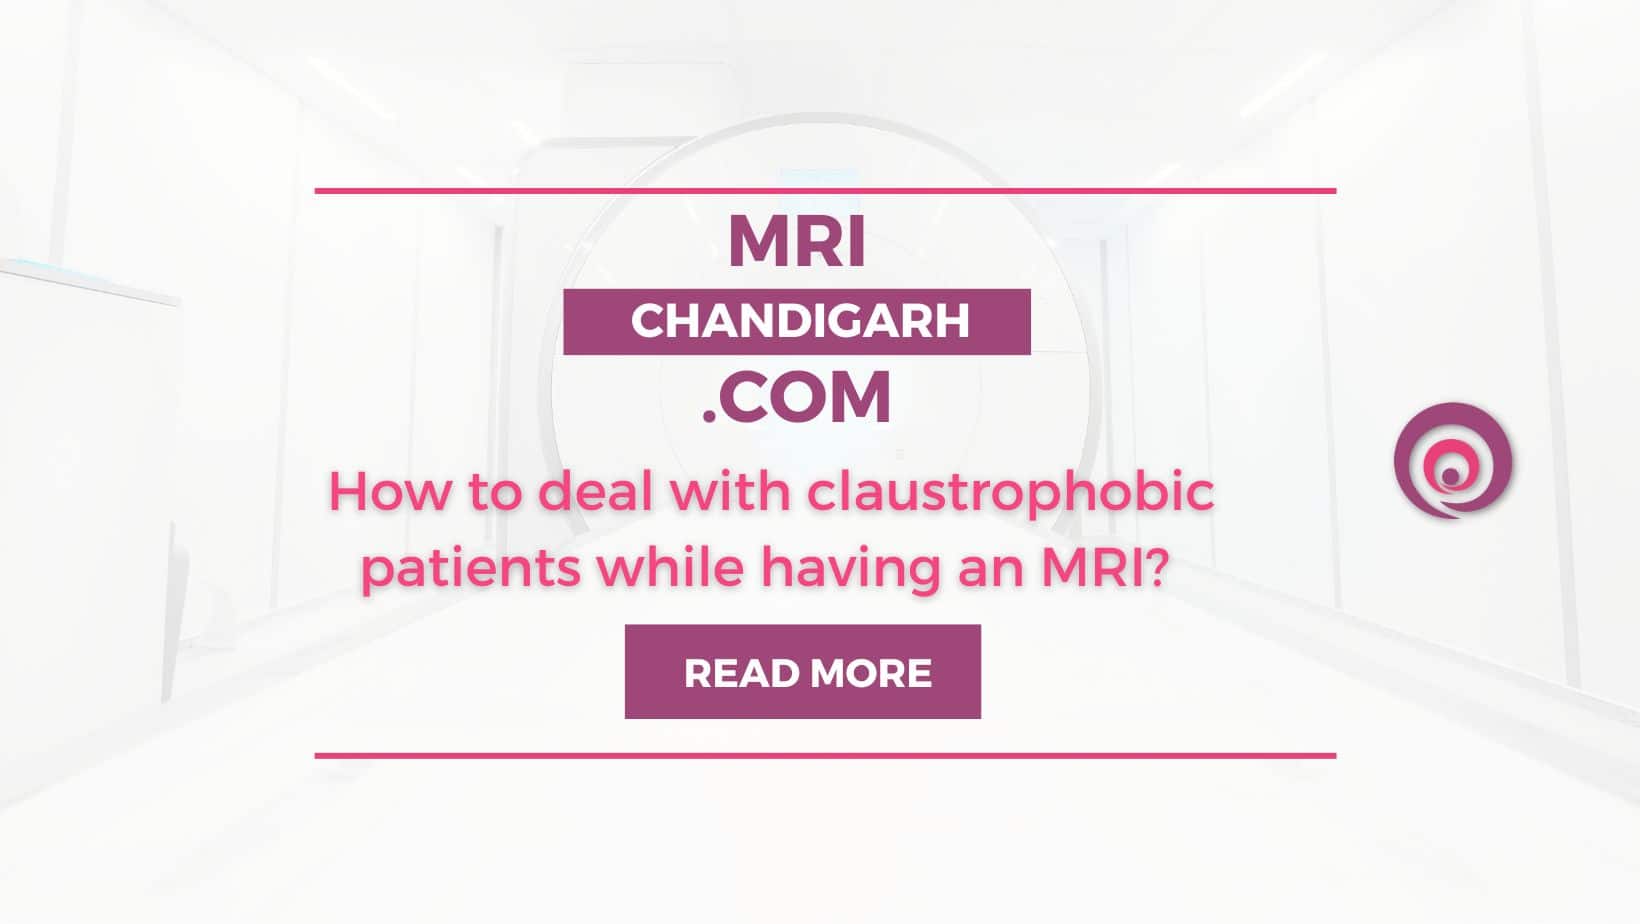 How to deal with claustrophobic patients while having an MRI?